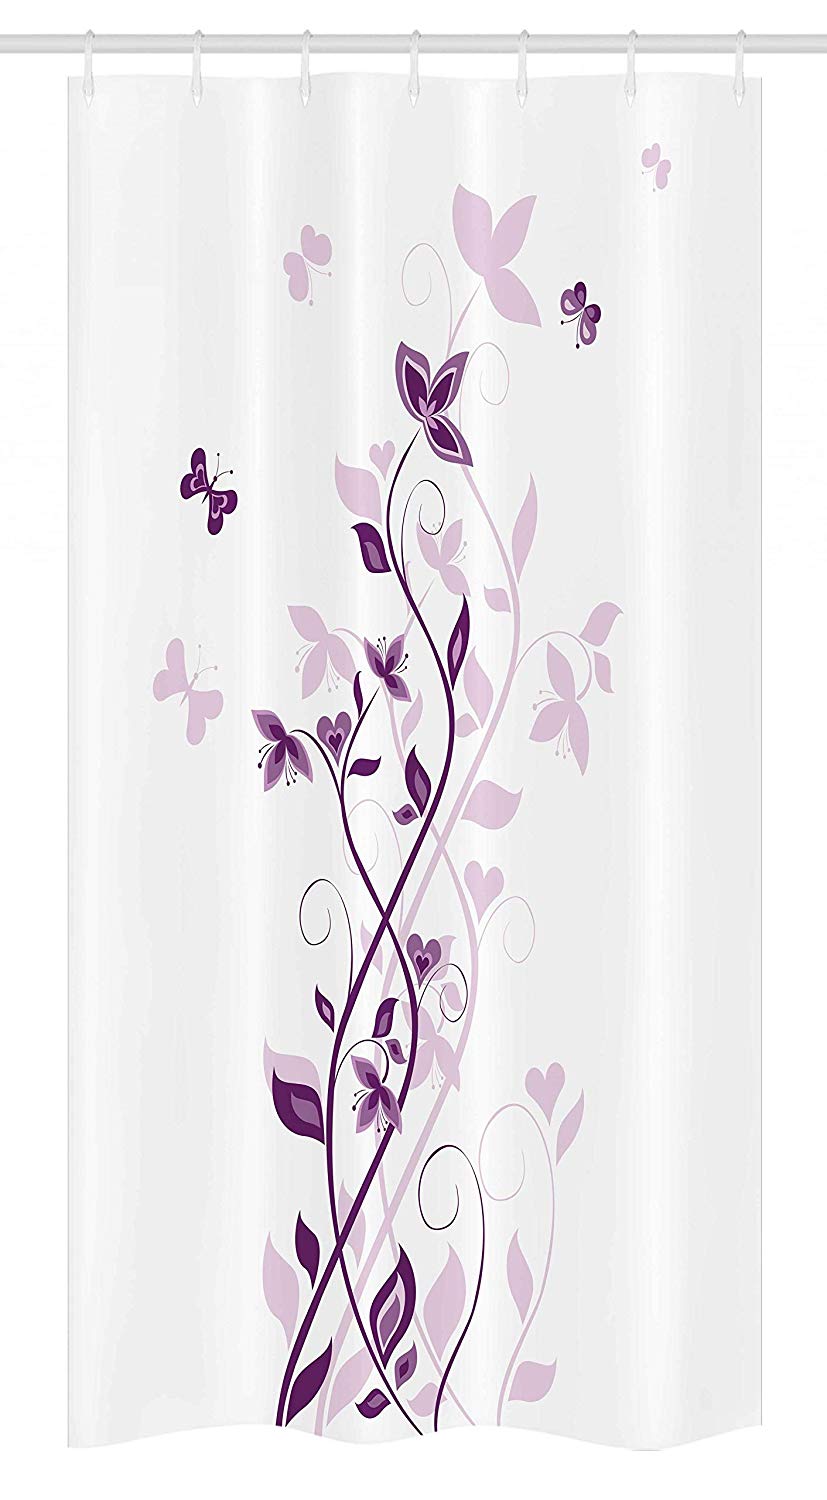 Ambesonne Purple Stall Shower Curtain, Violet Tree Swirling Persian Lilac Blooms with Butterfly Ornamental Plant Graphic, Fabric Bathroom Decor Set with Hooks, 36